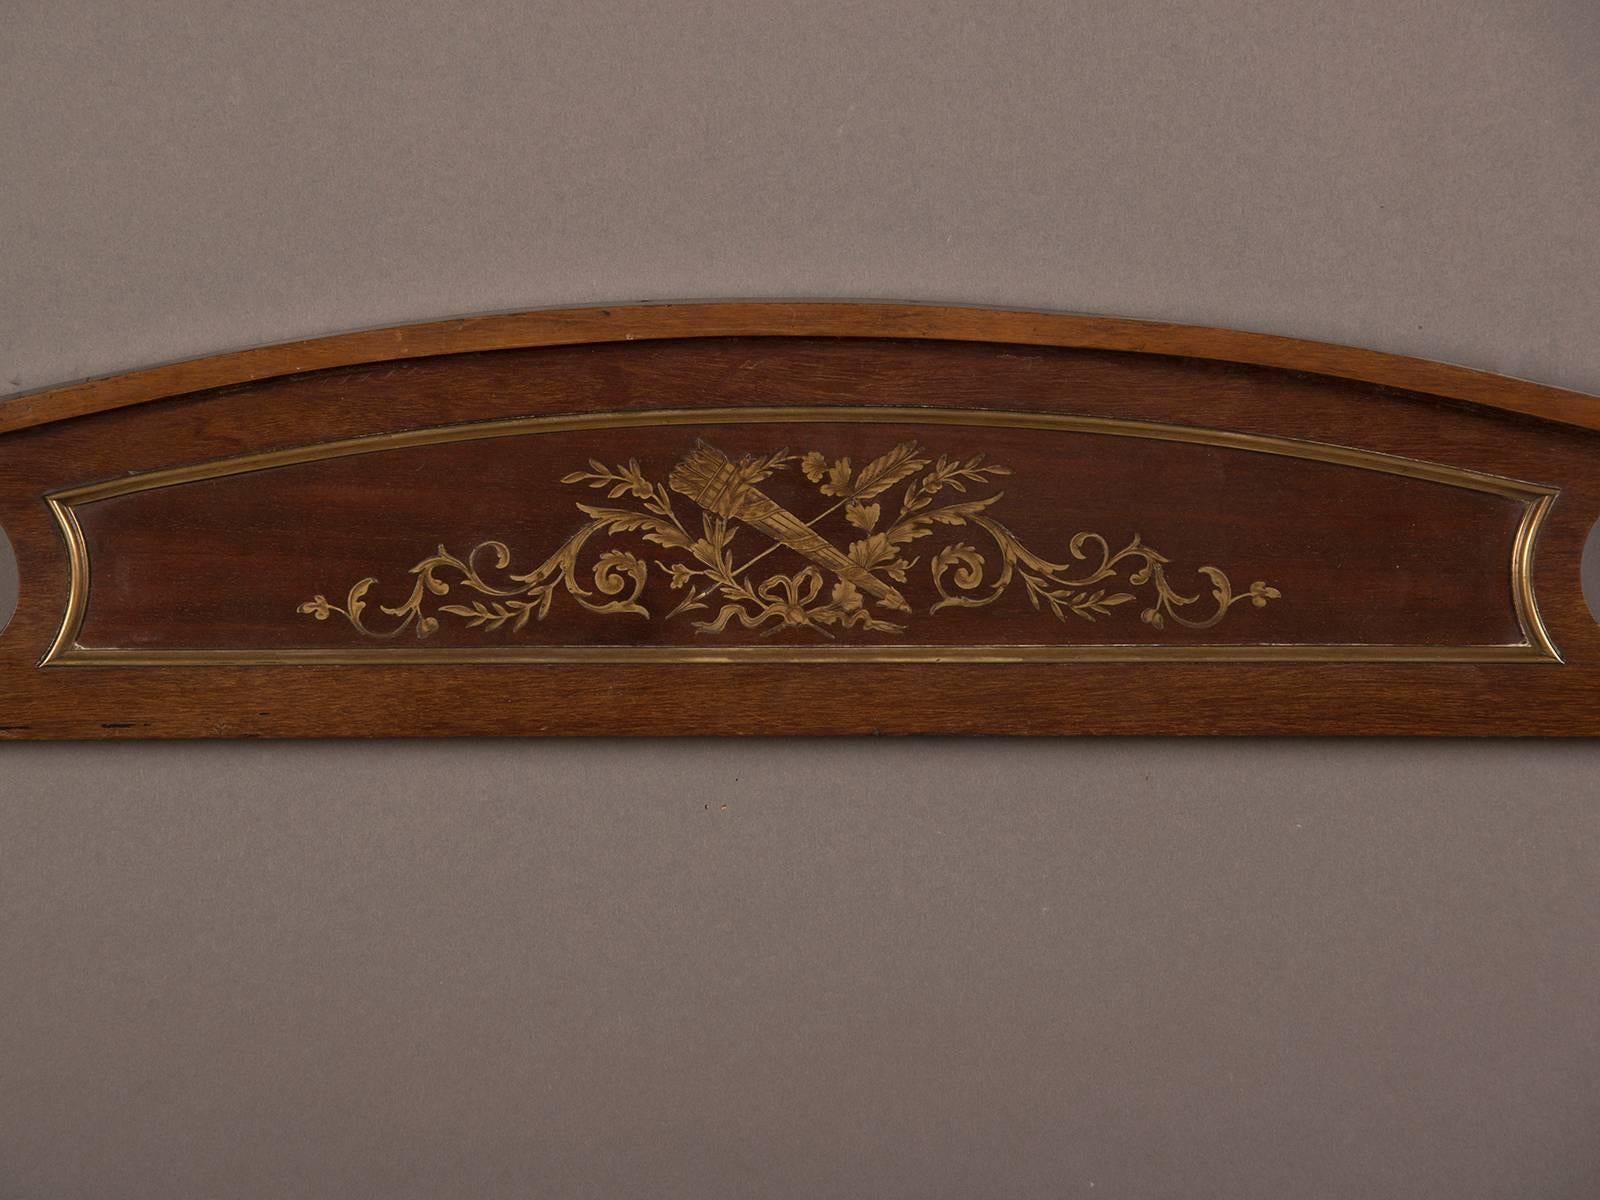 An antique French Louis XVI architectural fragment from a bibliothèque made of mahogany inlaid with brass from France circa 1870. The simple arch top frames the Louis XVI pattern of a quiver of arrows amidst a group of twining foliage. This piece